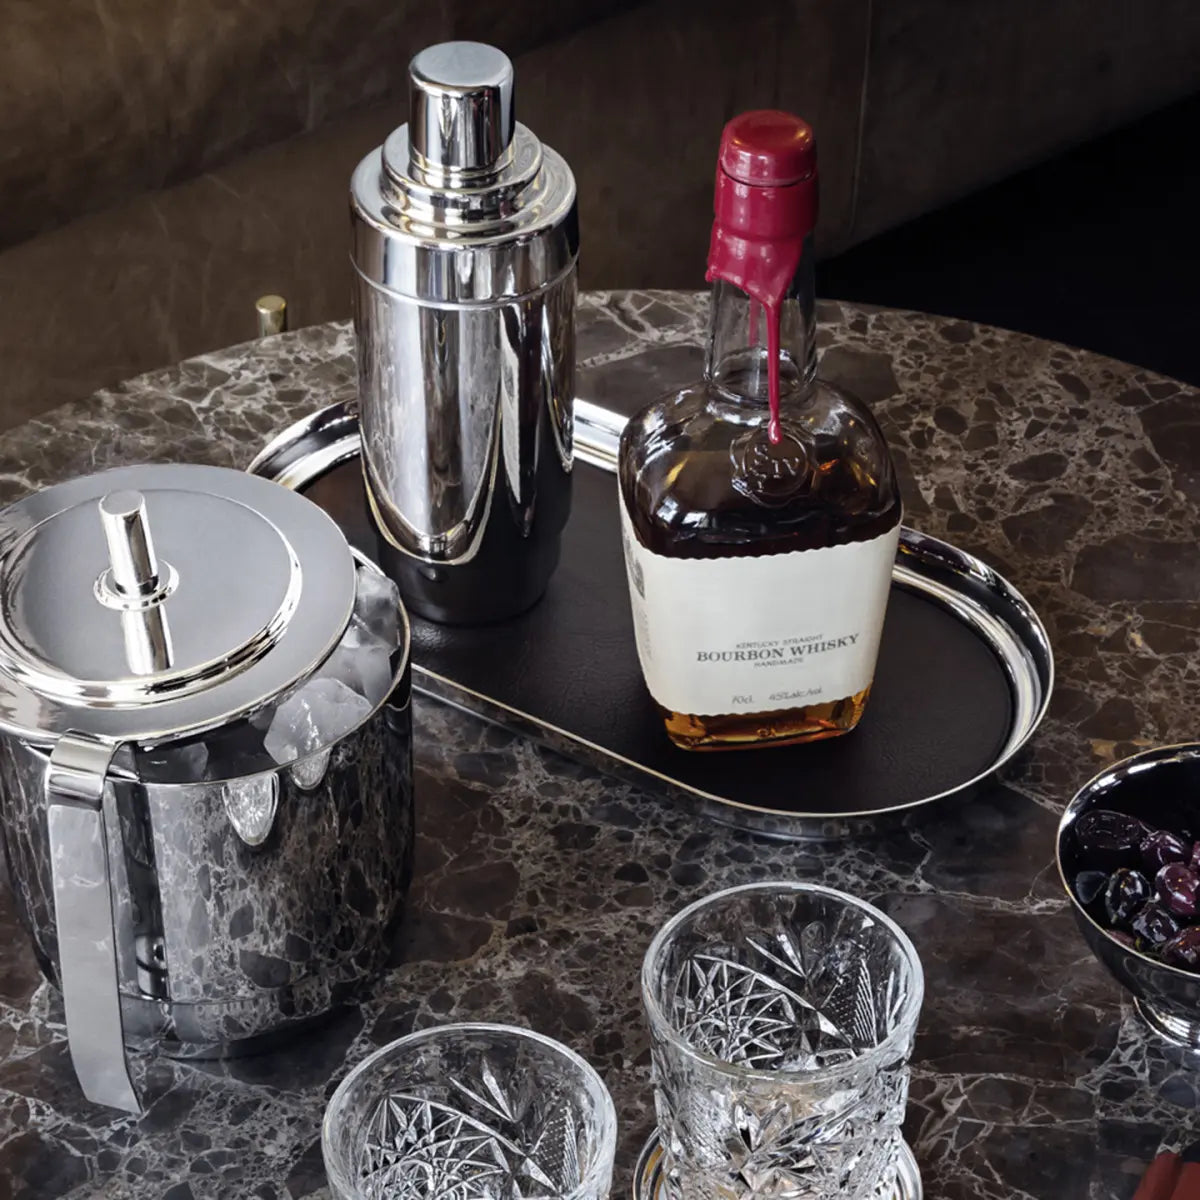 GEORG JENSEN MANHATTAN TRAY WITH A WHISKEY BOTTLE AND OTHER BARWARE ON A DINING ROOM TABLE